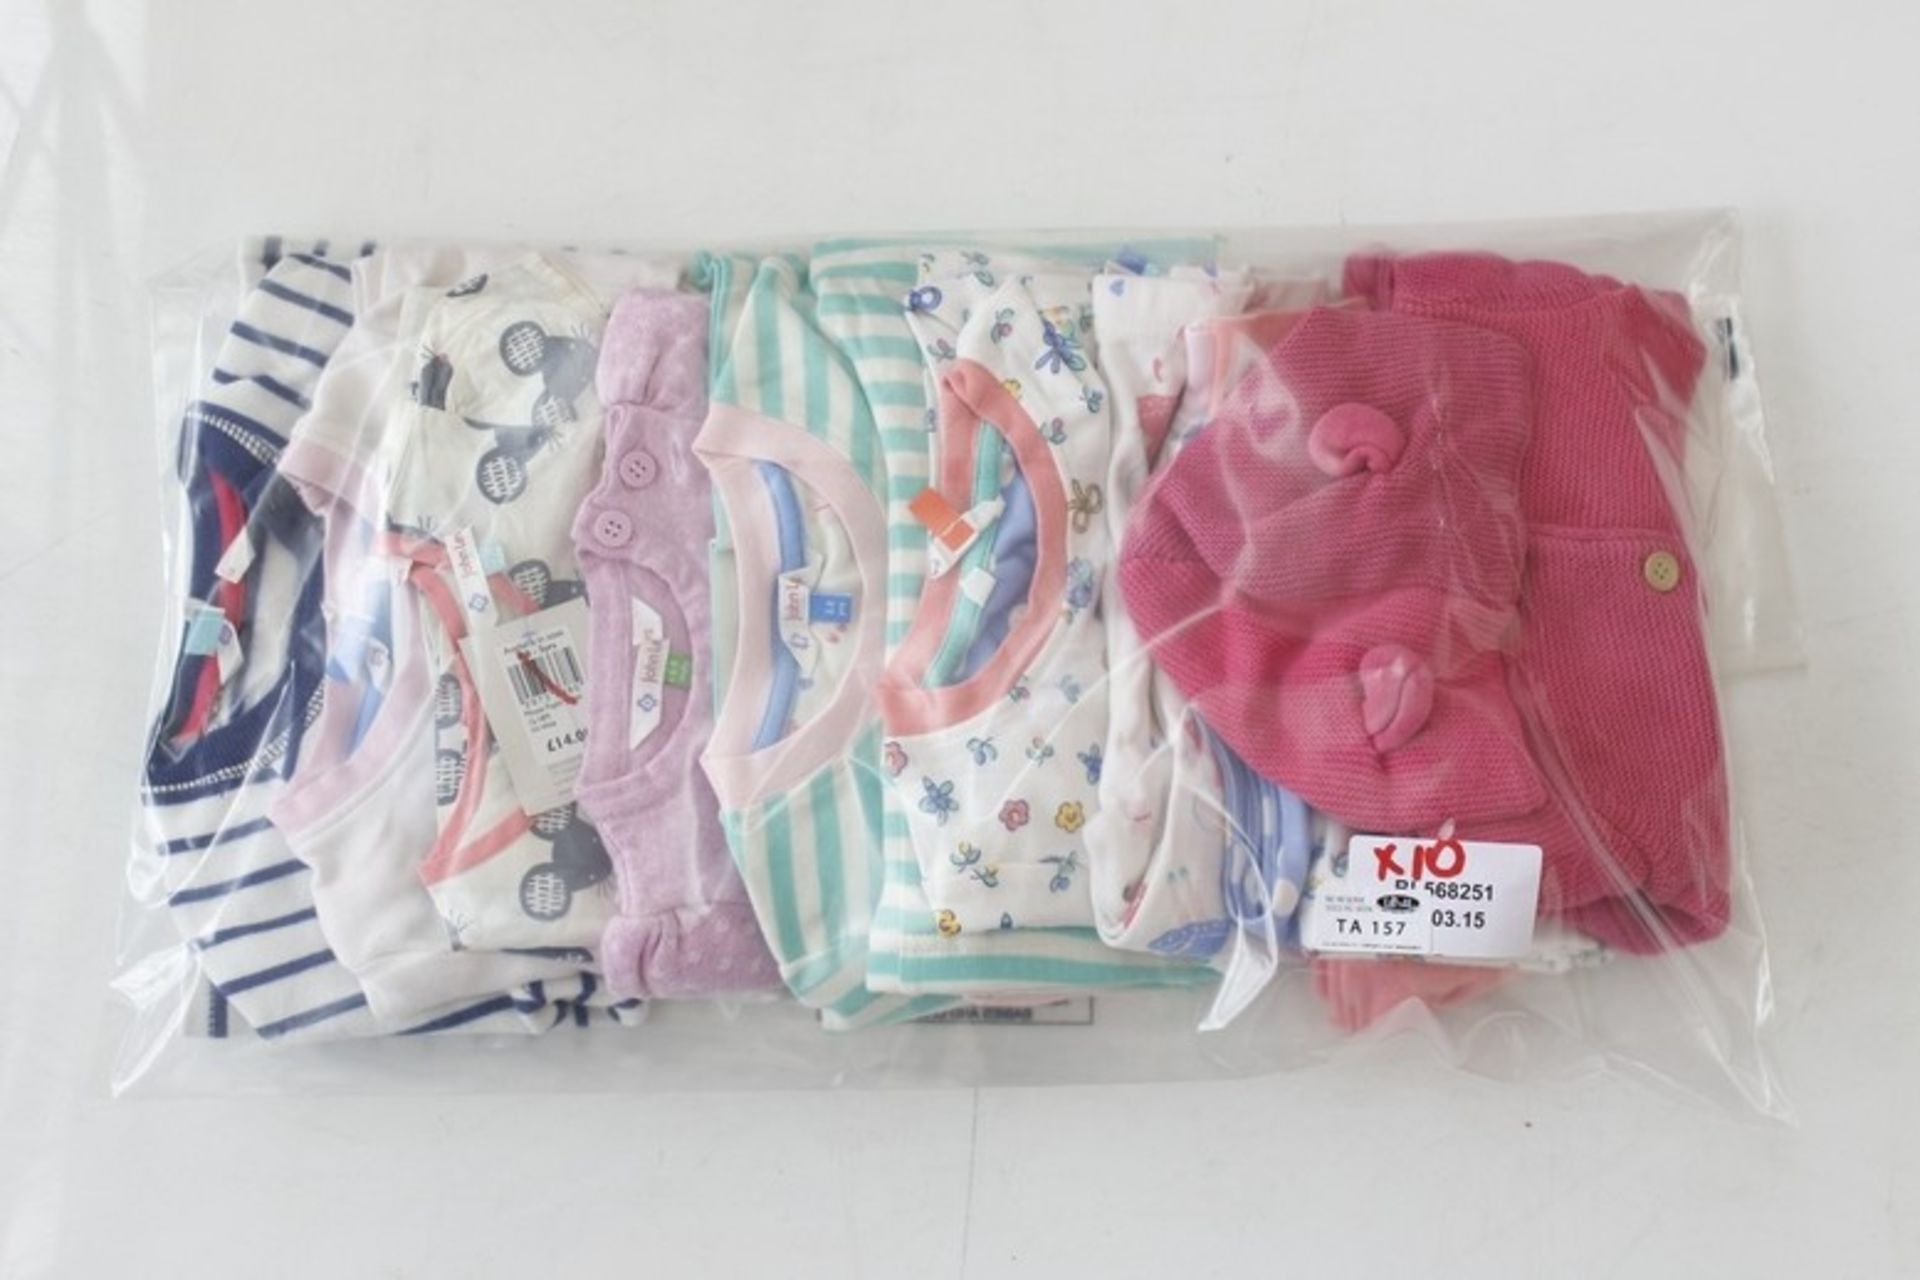 ONE BAG TO CONTAIN 10X ASSORTED ITEMS OF CHILDREN'S DESIGNER FASHION WARE (BL568251)